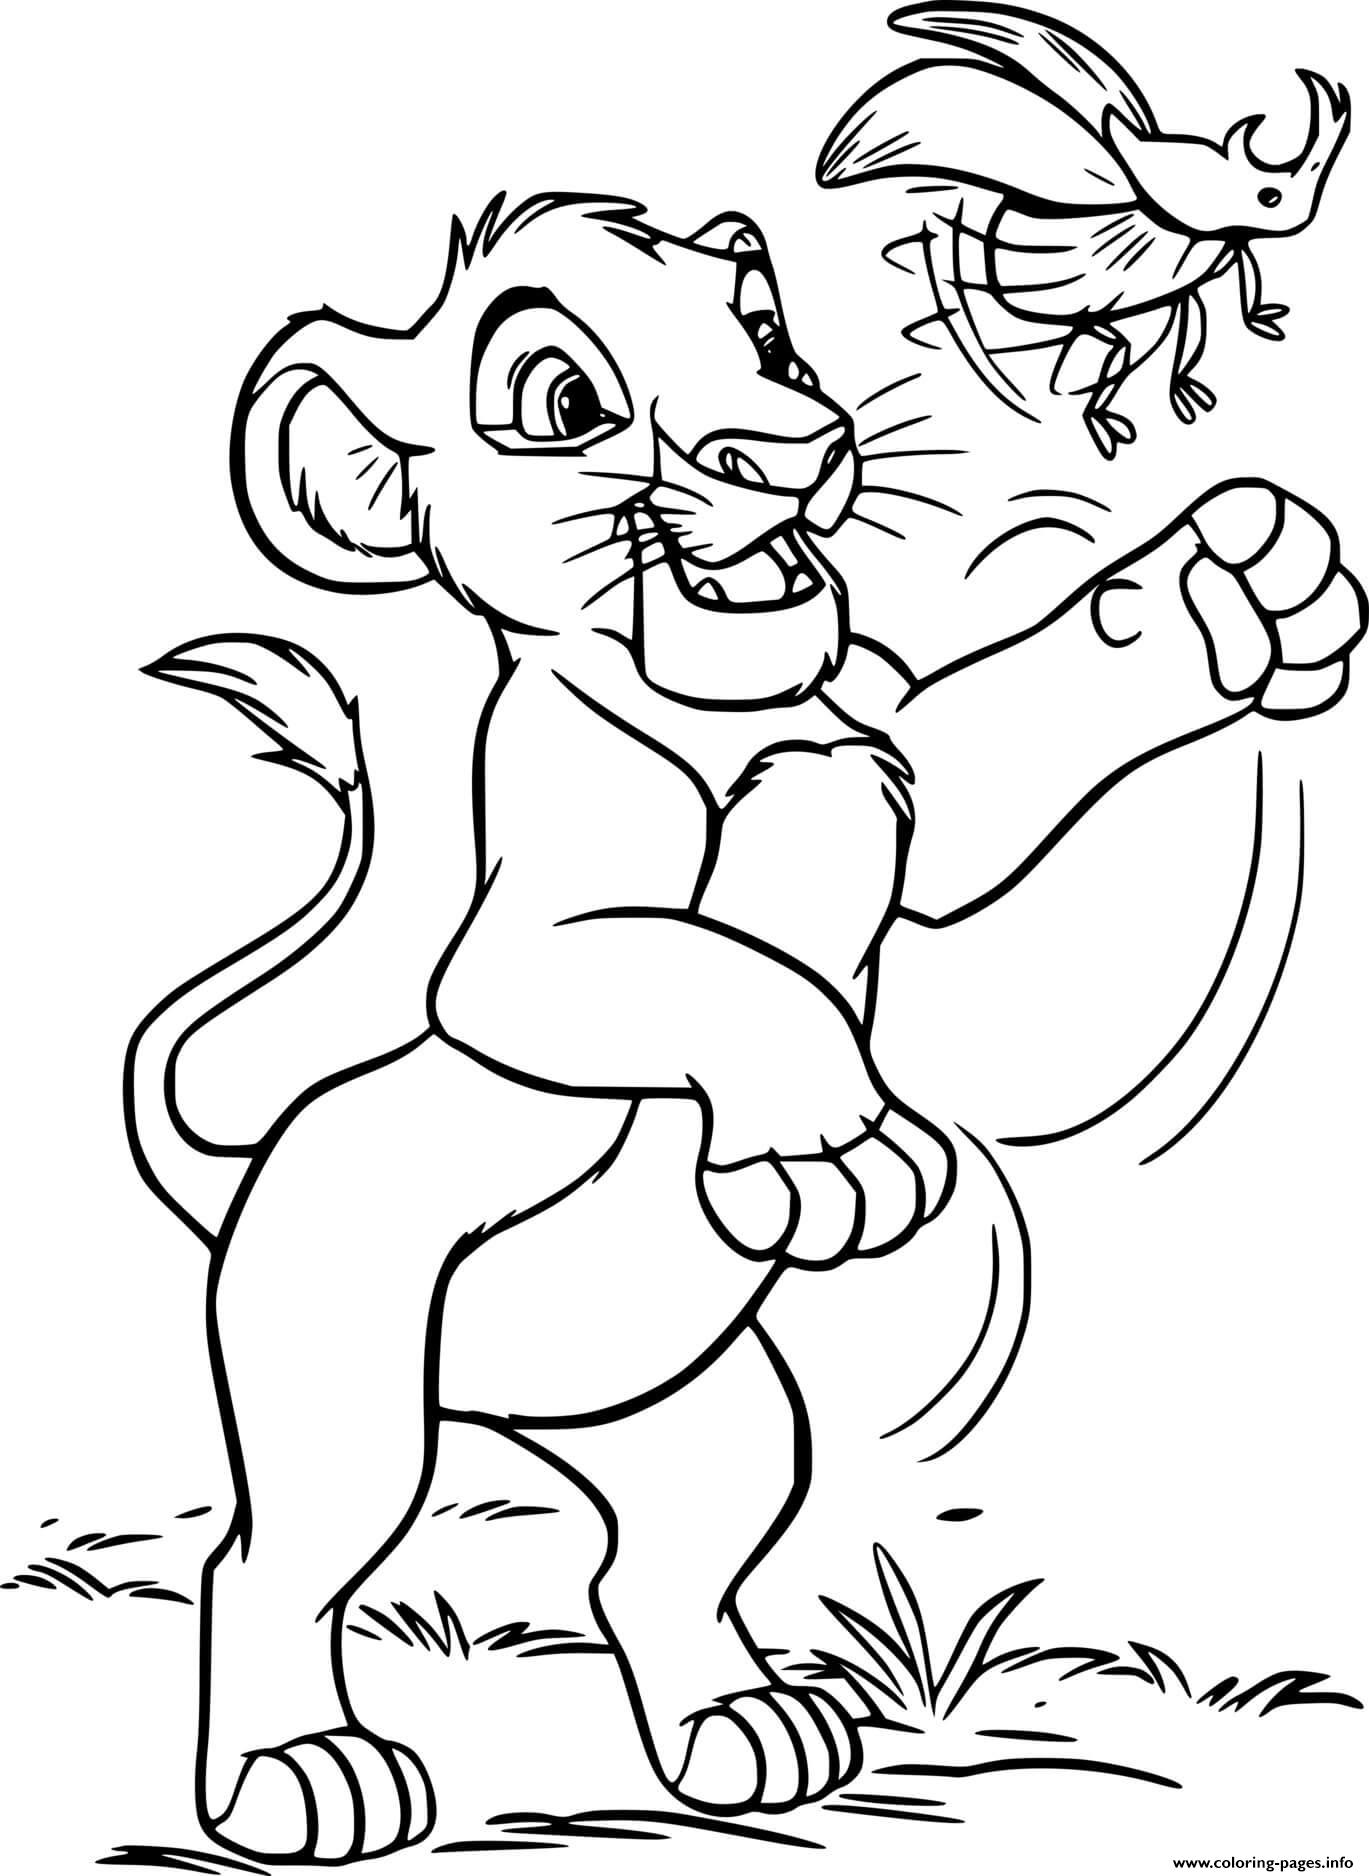 Young Simba Chasing A Rhinoceros Beetle Coloring Pages Printable